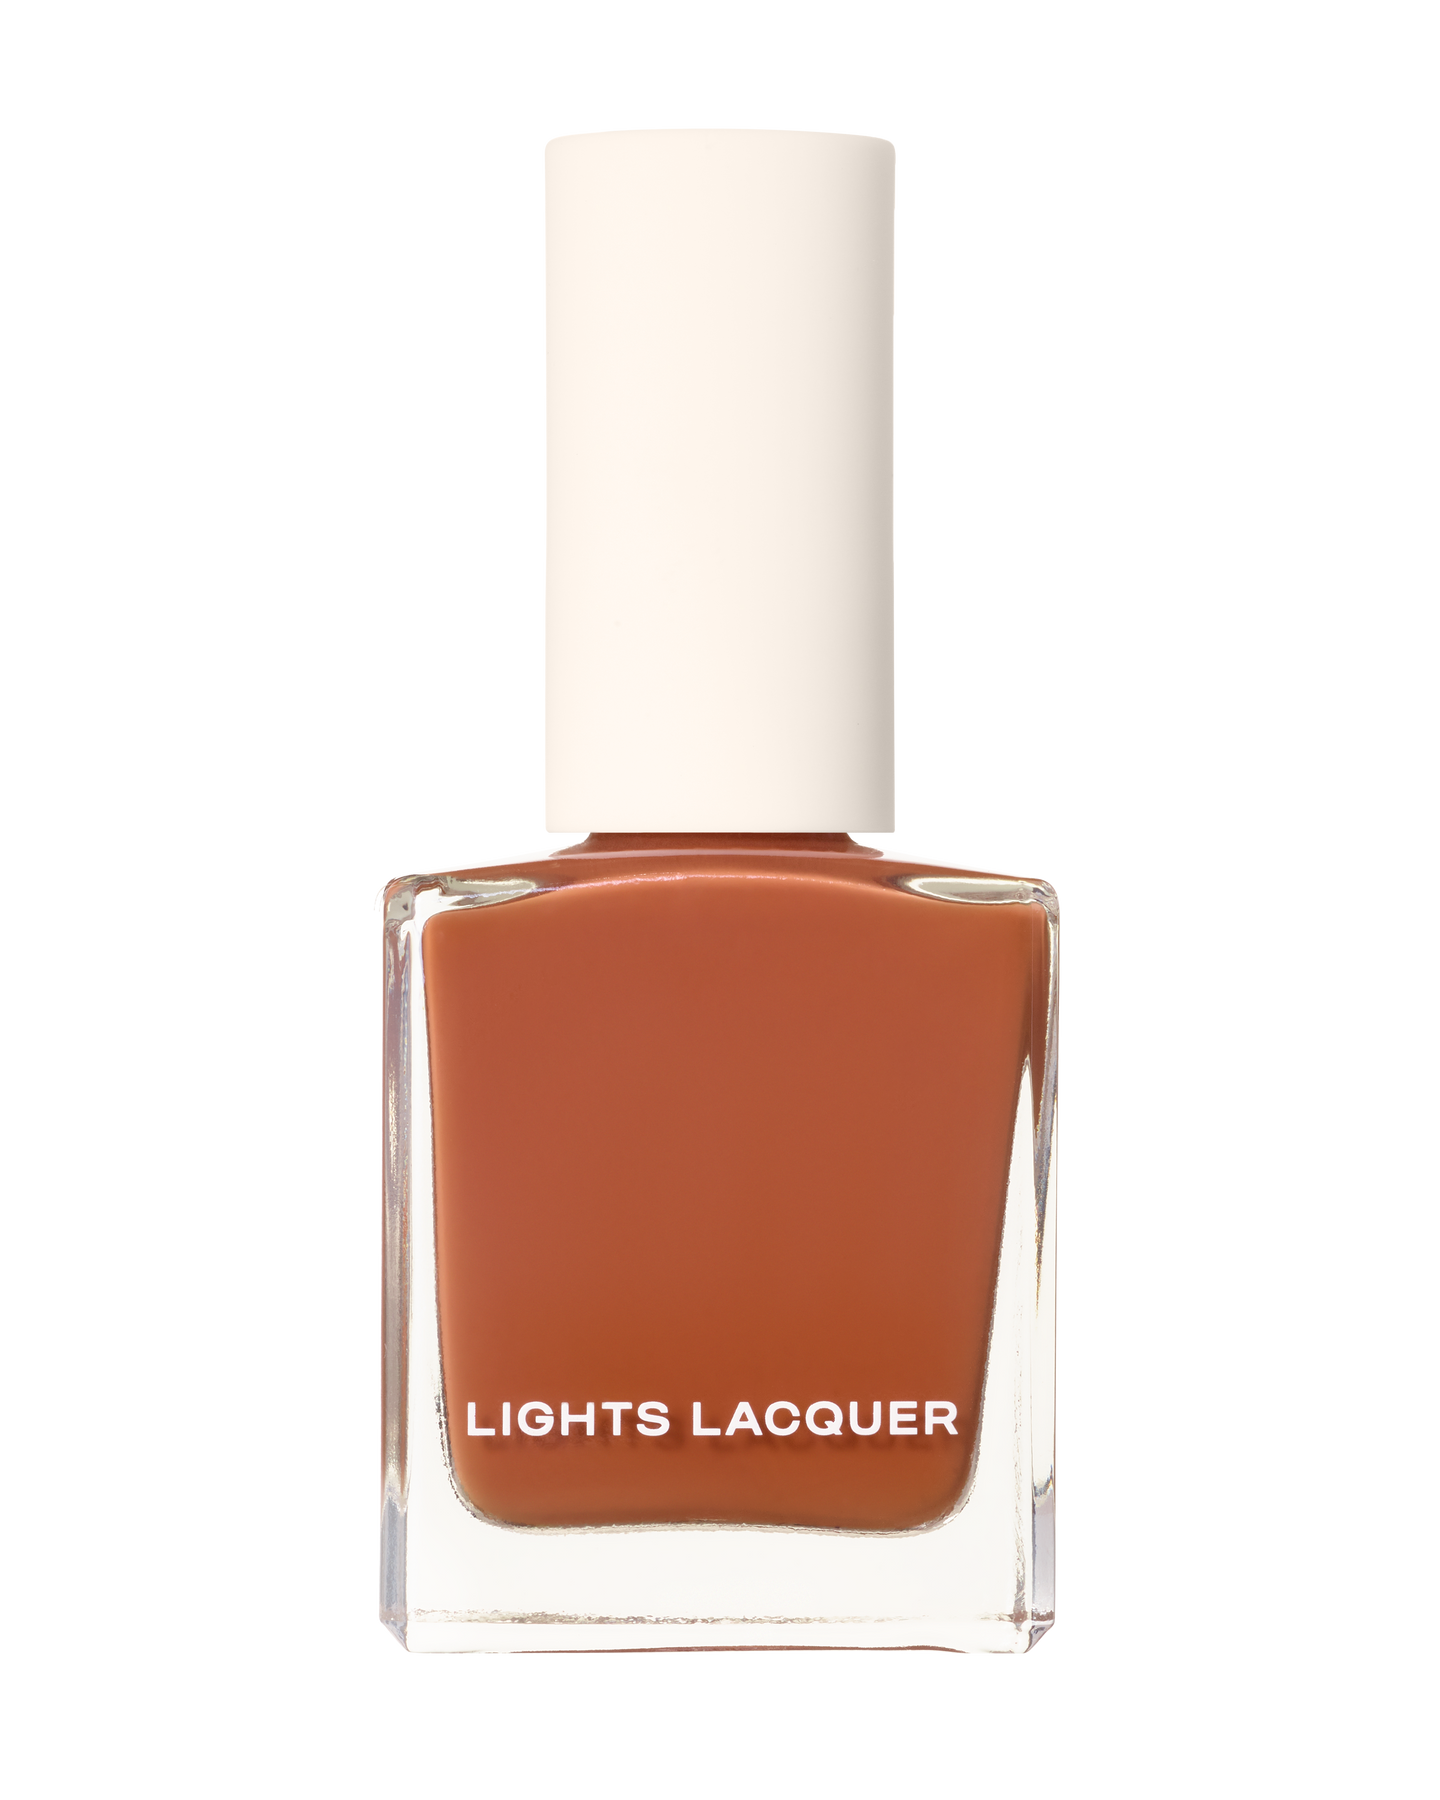 The Butler – Lights Lacquer